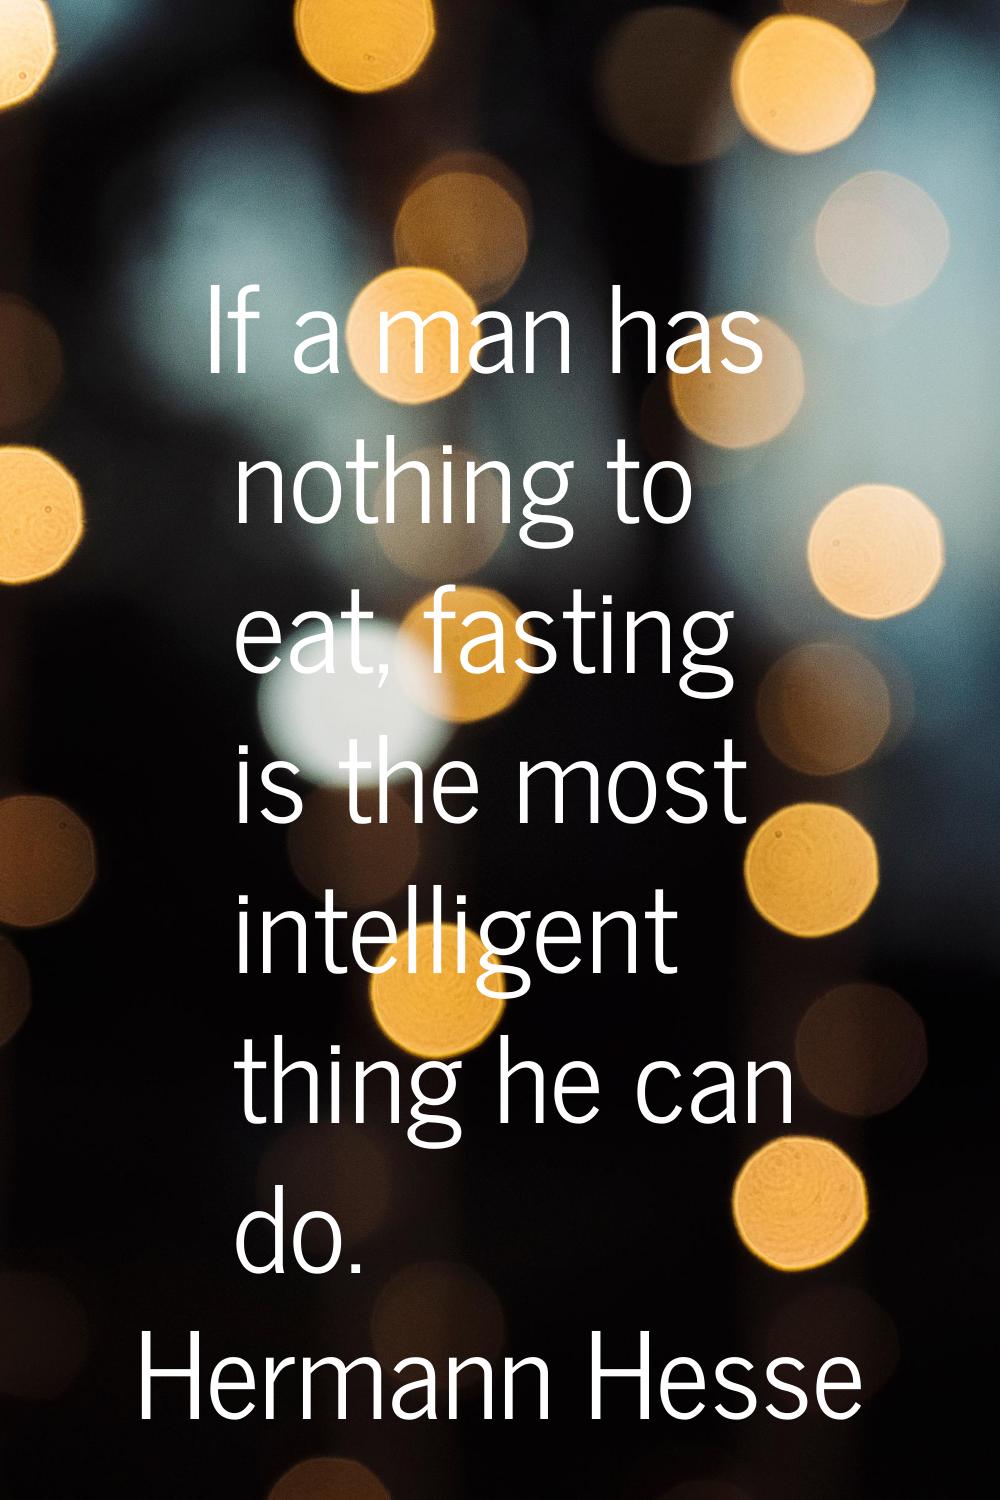 If a man has nothing to eat, fasting is the most intelligent thing he can do.